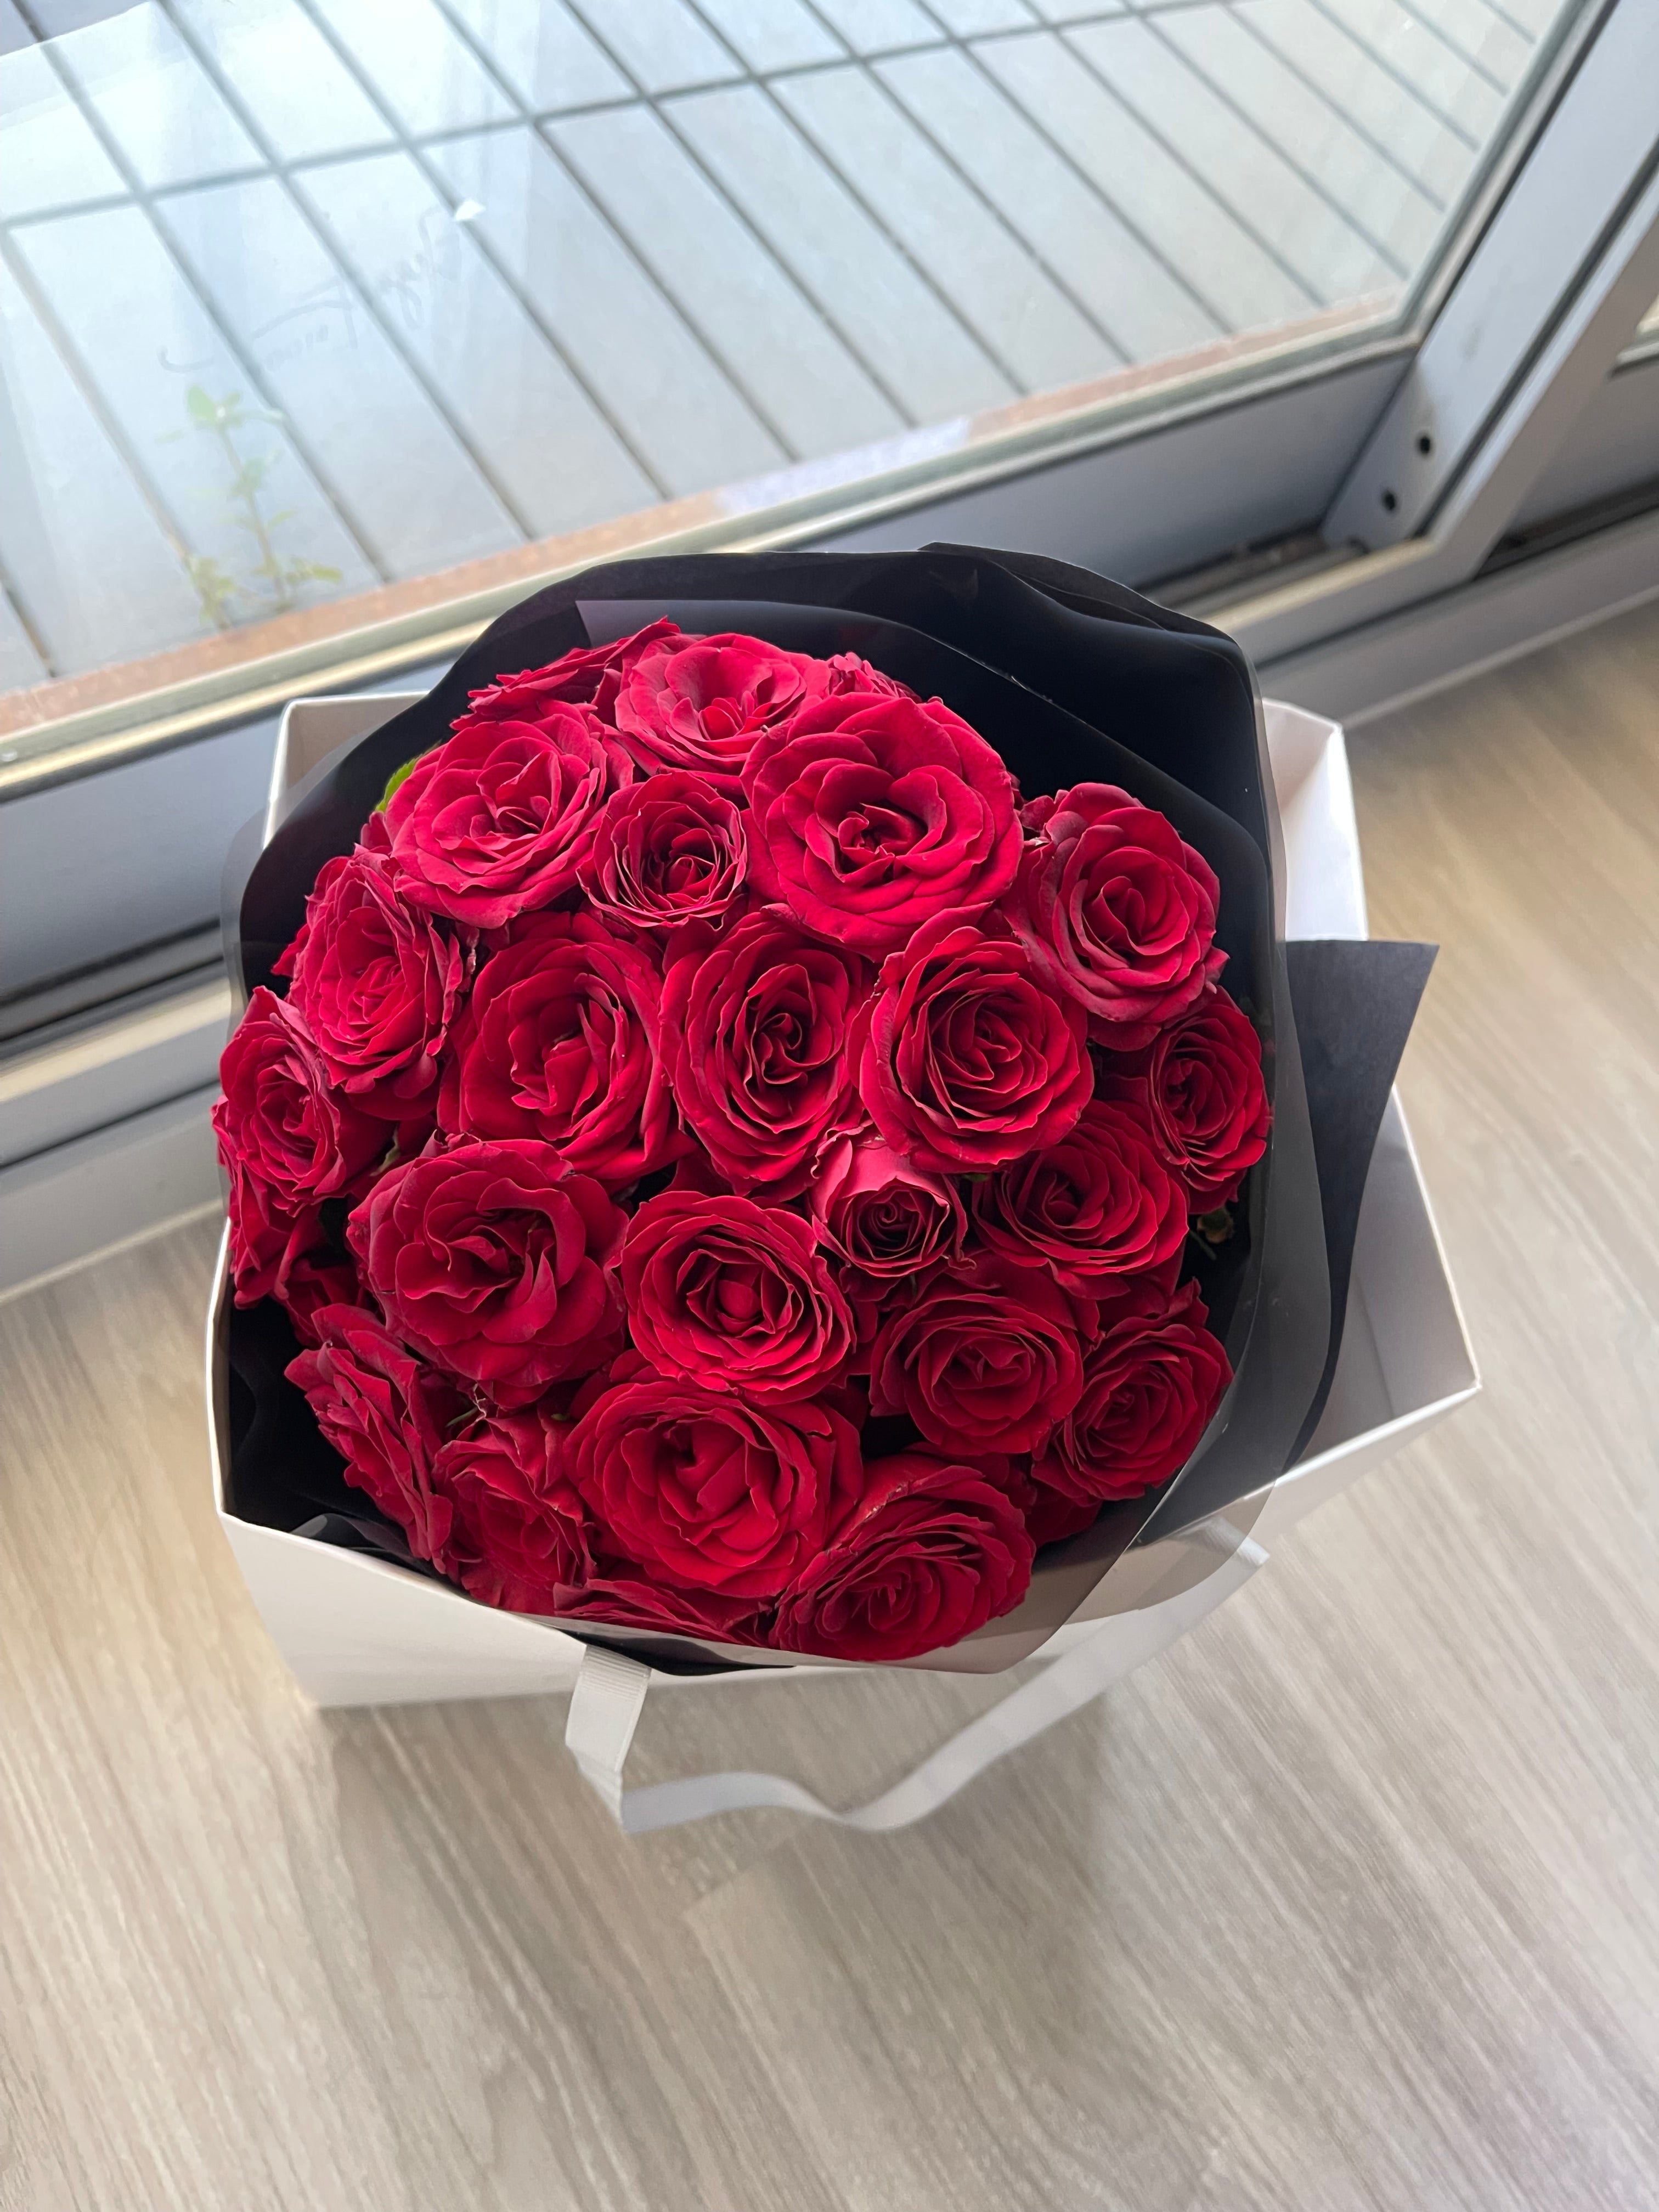 Red baby roses bouquet